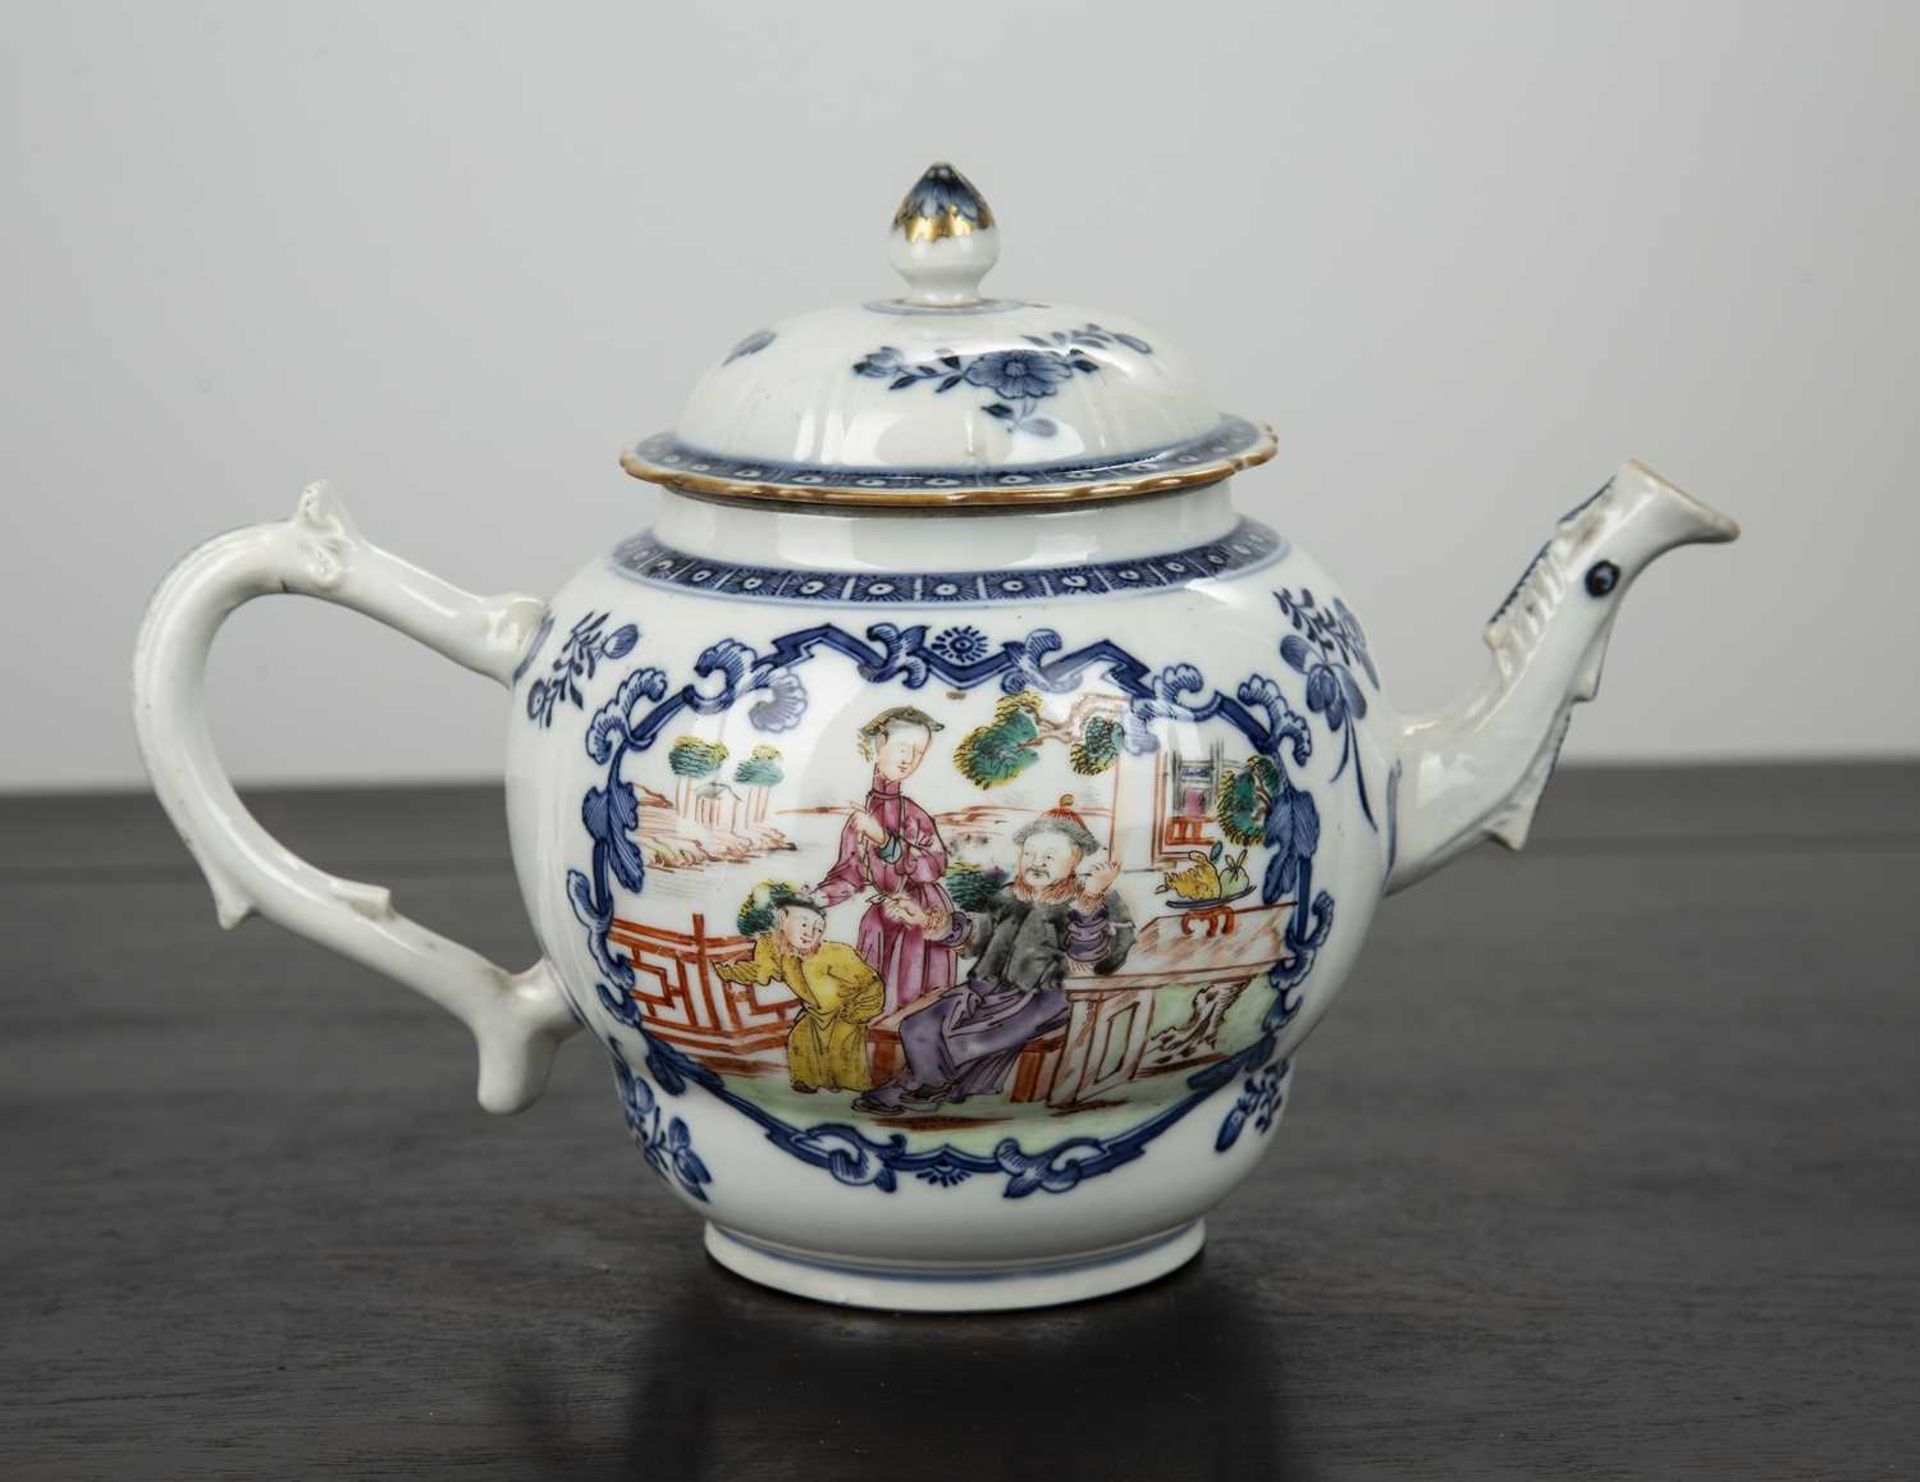 Mandarin porcelain teapot Chinese, 18th Century painted with blue framed panels of figures, 22.5cm x - Bild 2 aus 4